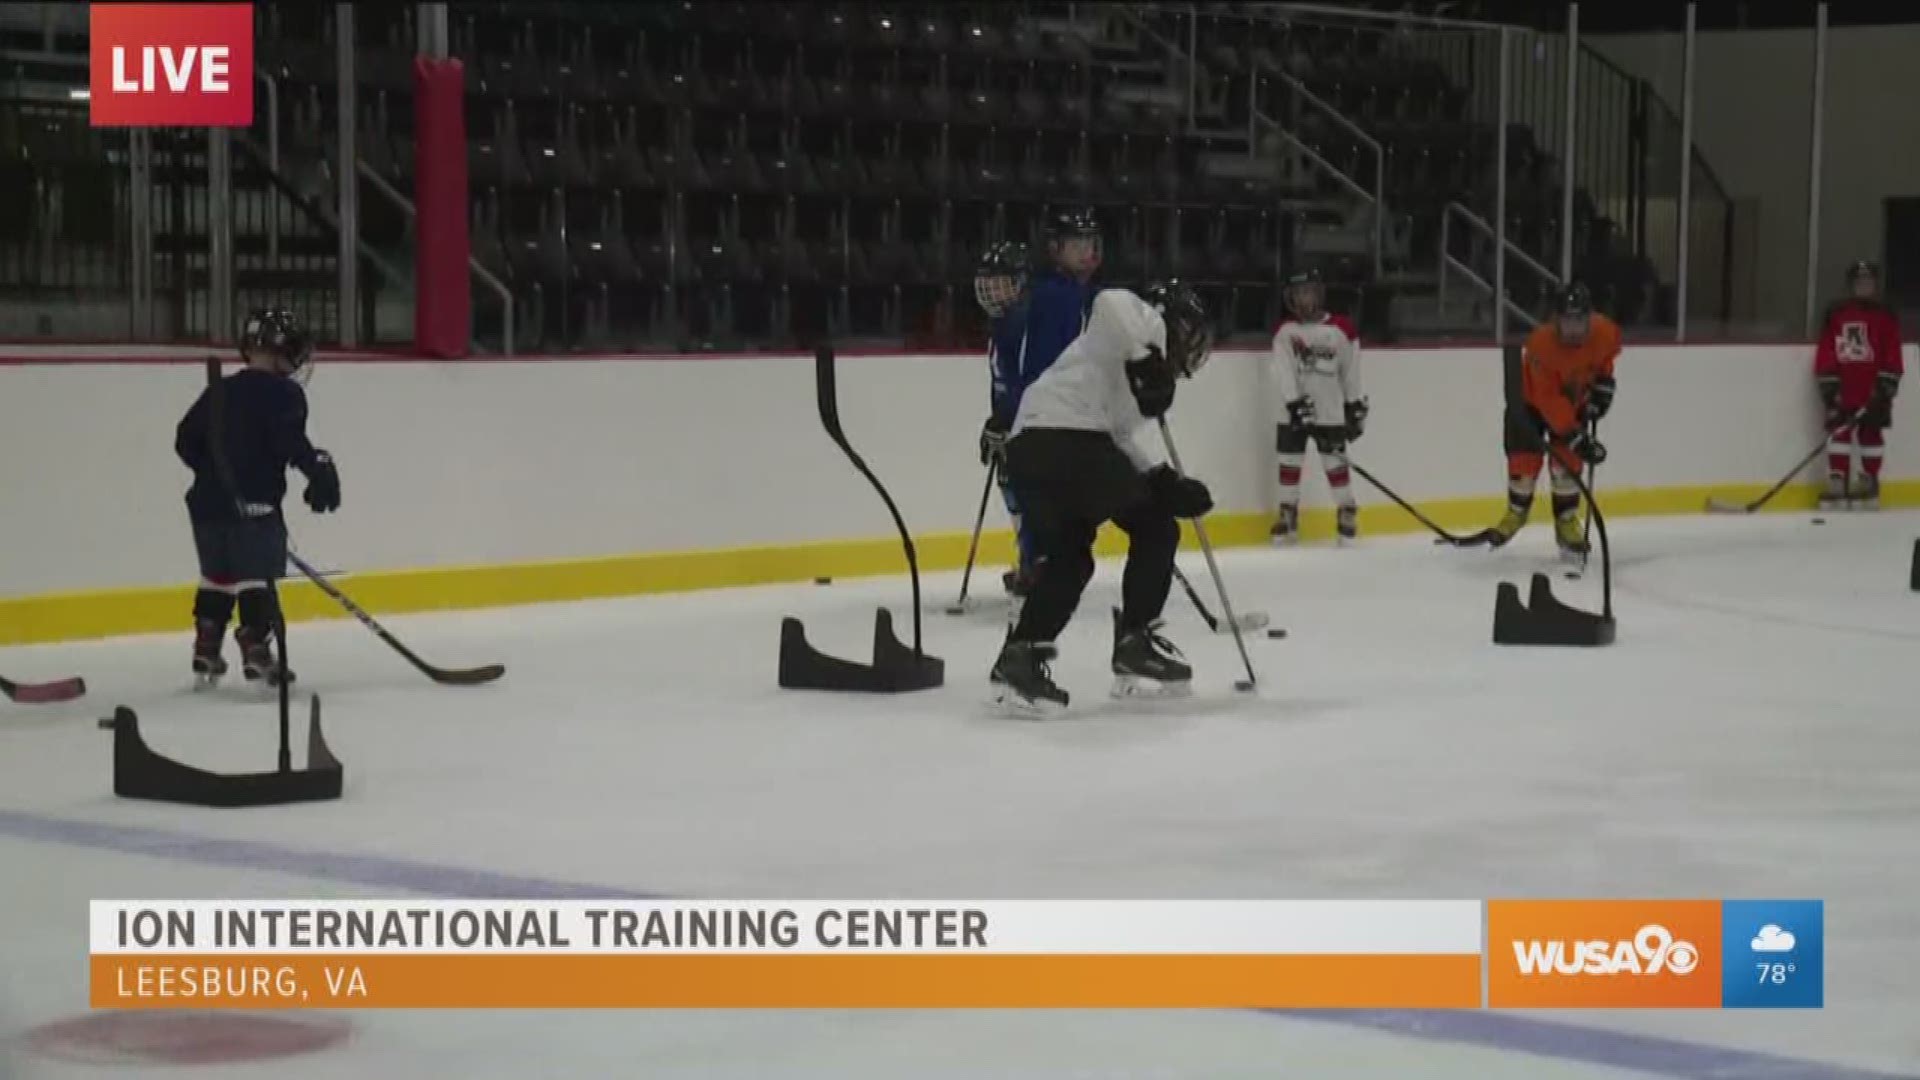 It's not too late to get your kids to hockey camp at the ION International Training Center in Leesburg.